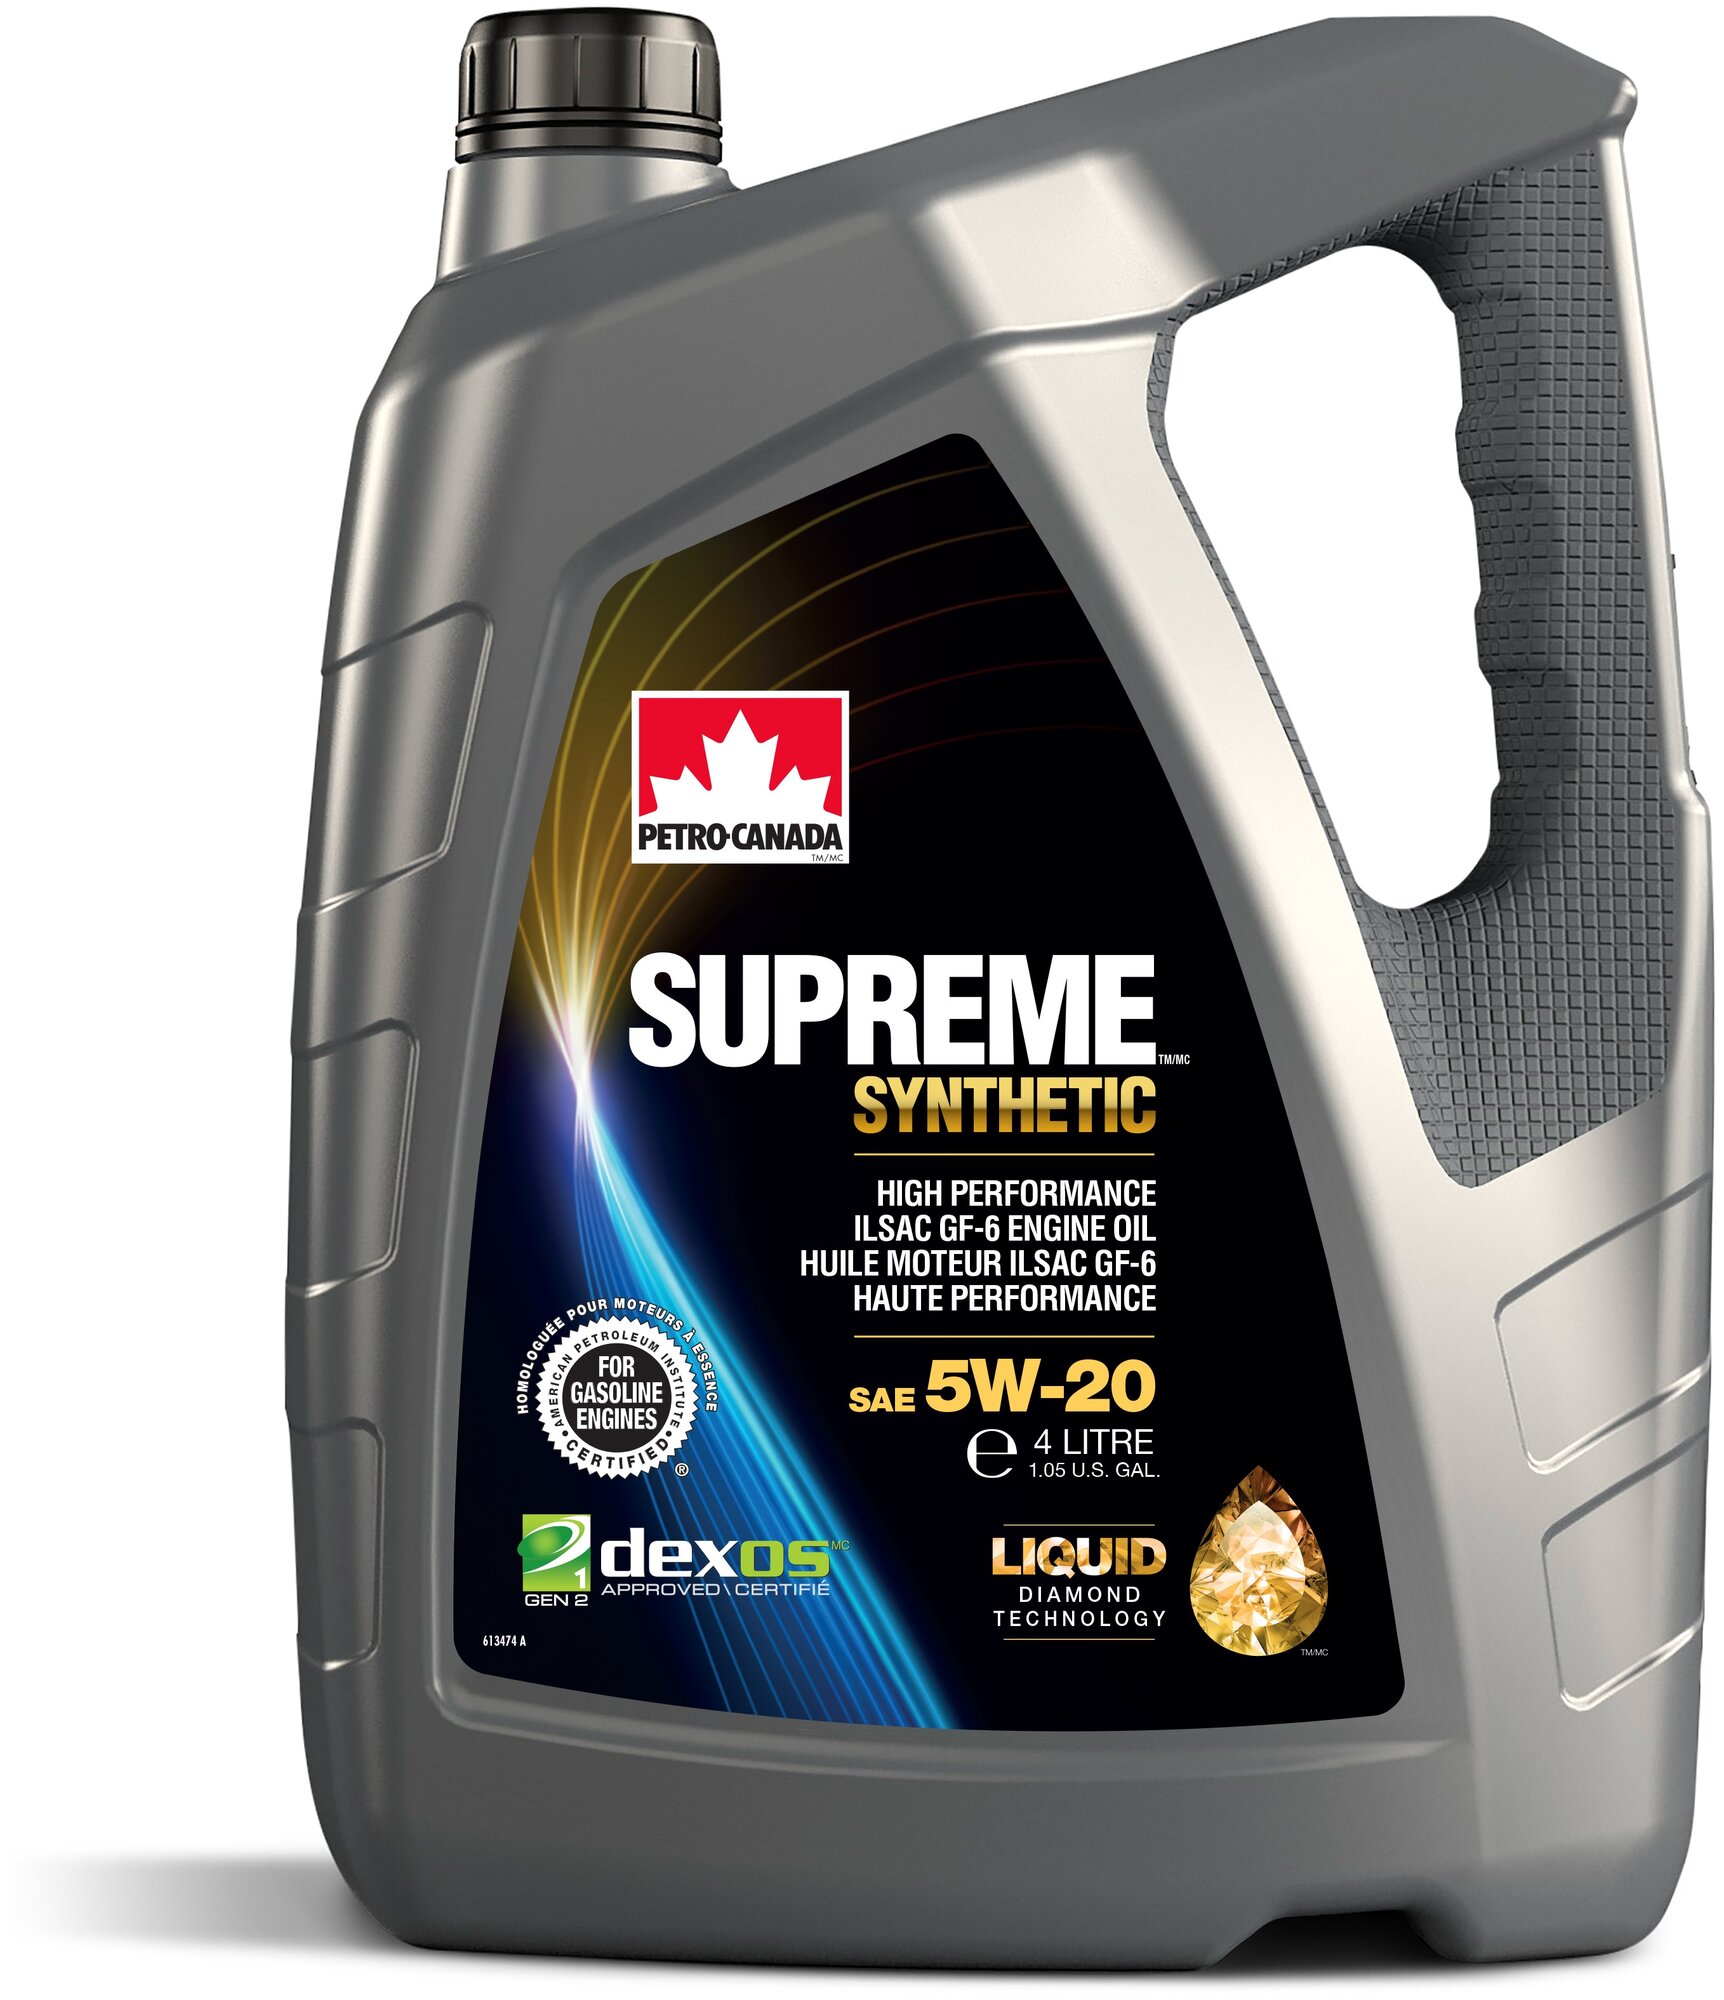 PETRO-CANADA Масло Моторное Синтетическое Supreme Synthetic 5w-30 4л